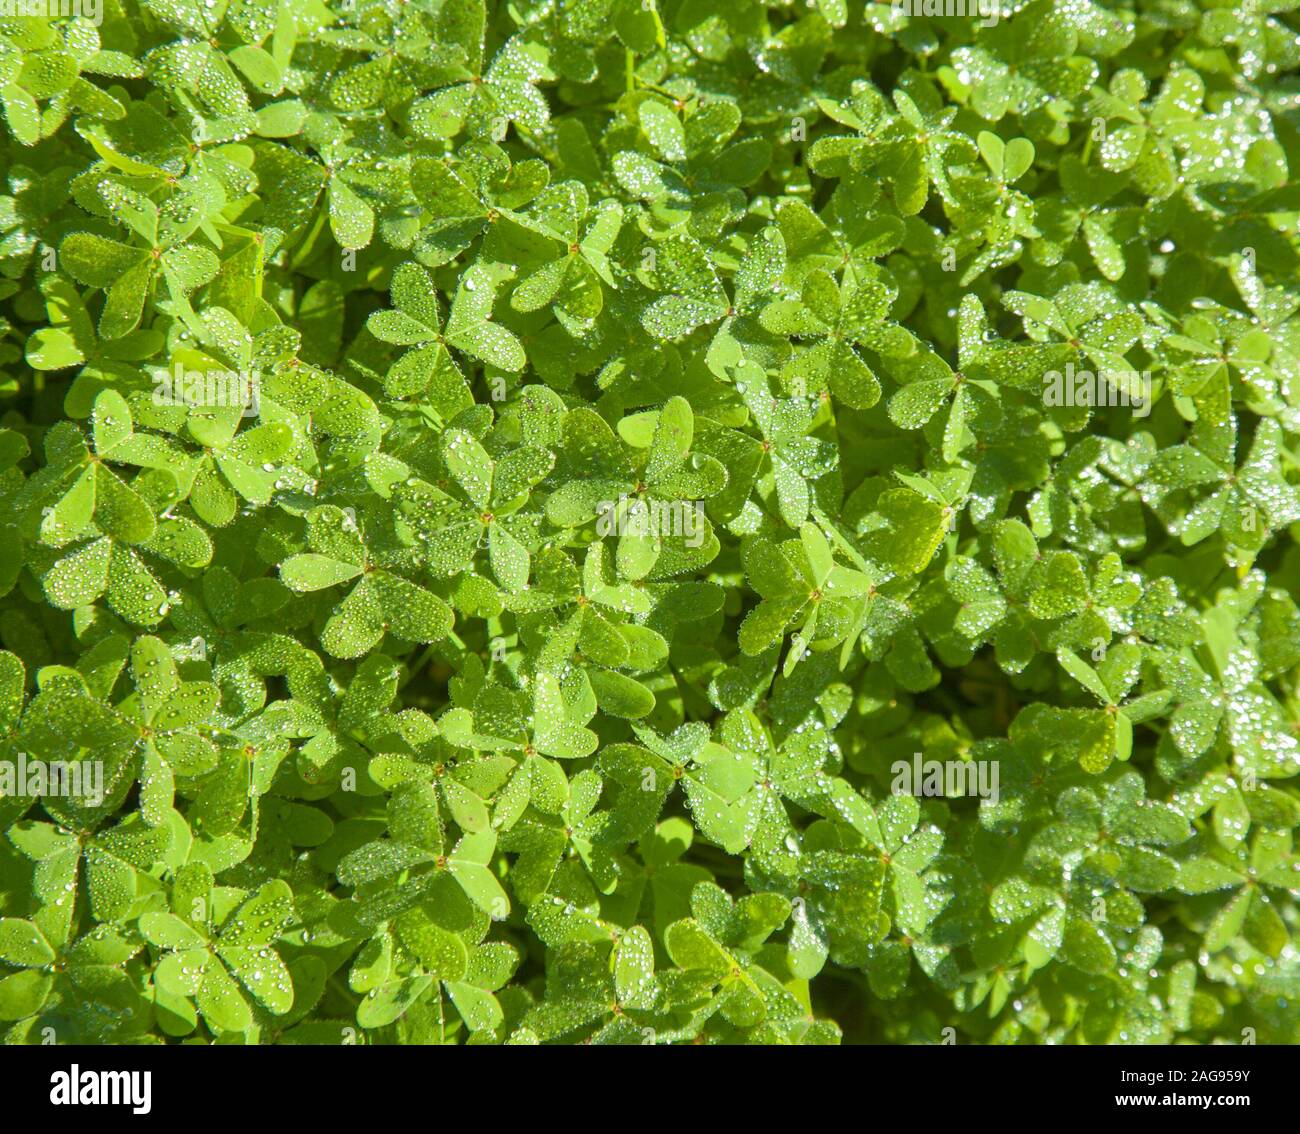 wet leaves of Oxalis pes-caprae natural floral macro background Stock Photo